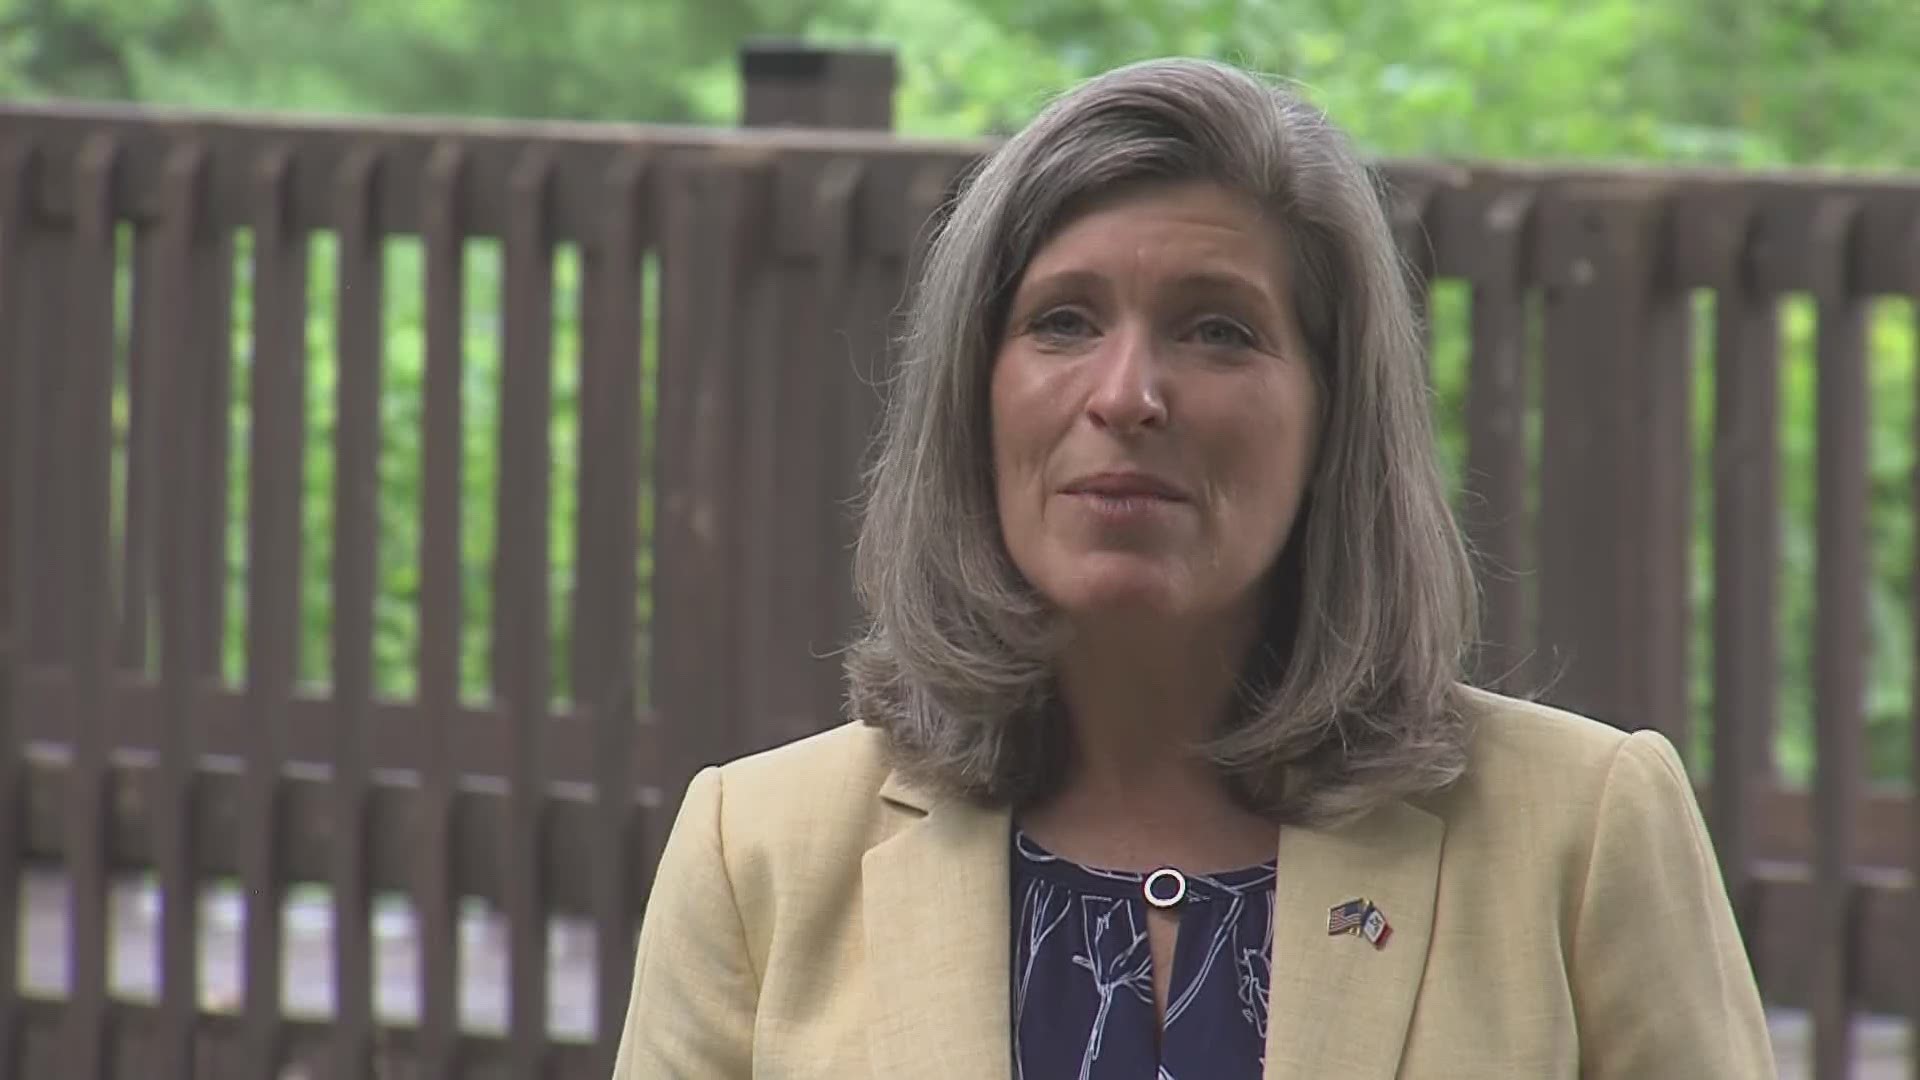 Senator Ernst tells Local 5's Rachel Droze that while the pandemic is causing some issues with trade, negotiations with China are moving forward.